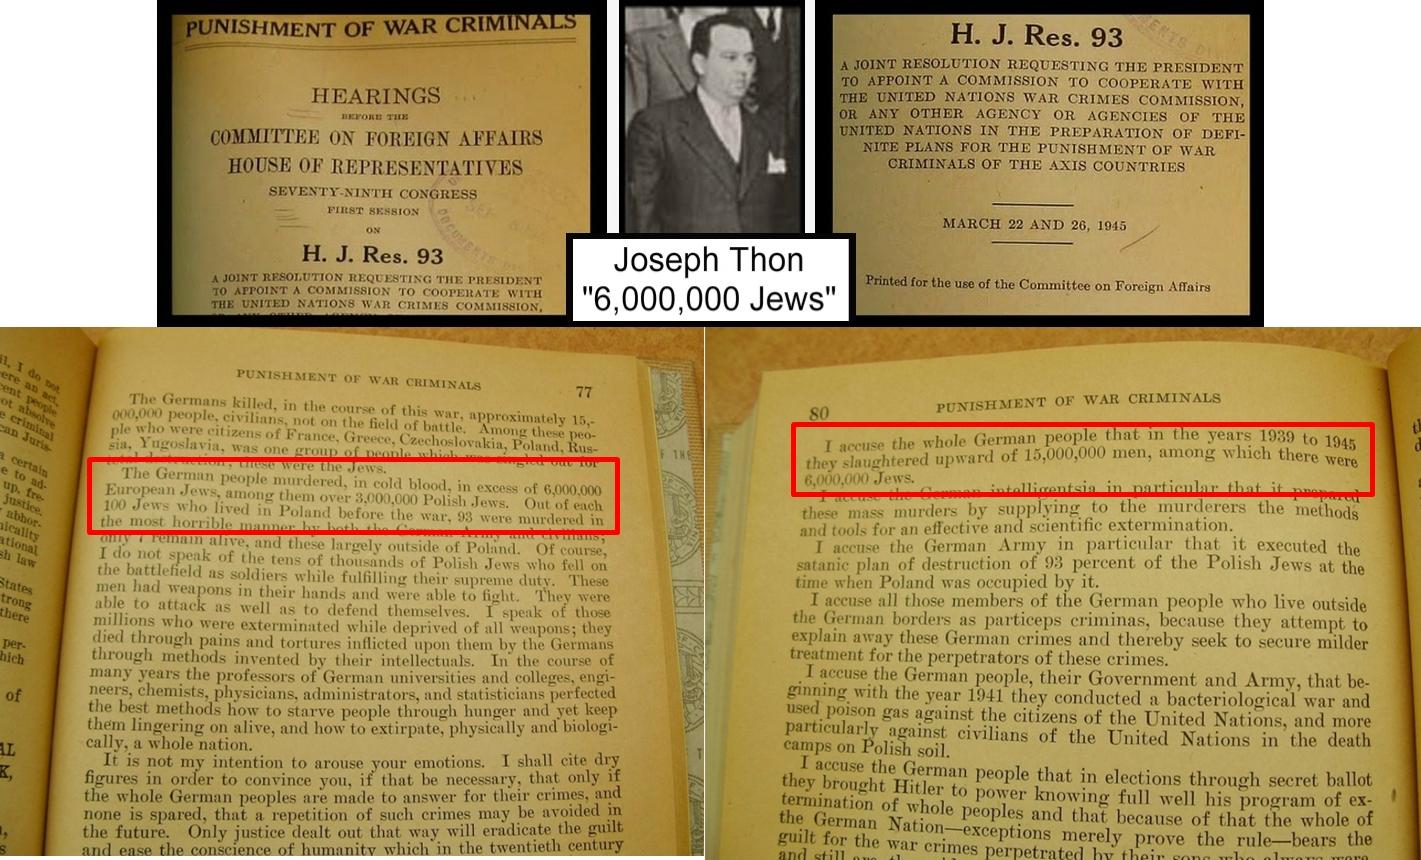 Zionist liar, Joseph Thon, let slip the “6,000,000 Jews have died” hoax a bit too early. These Jews just can’t help themselves can they?